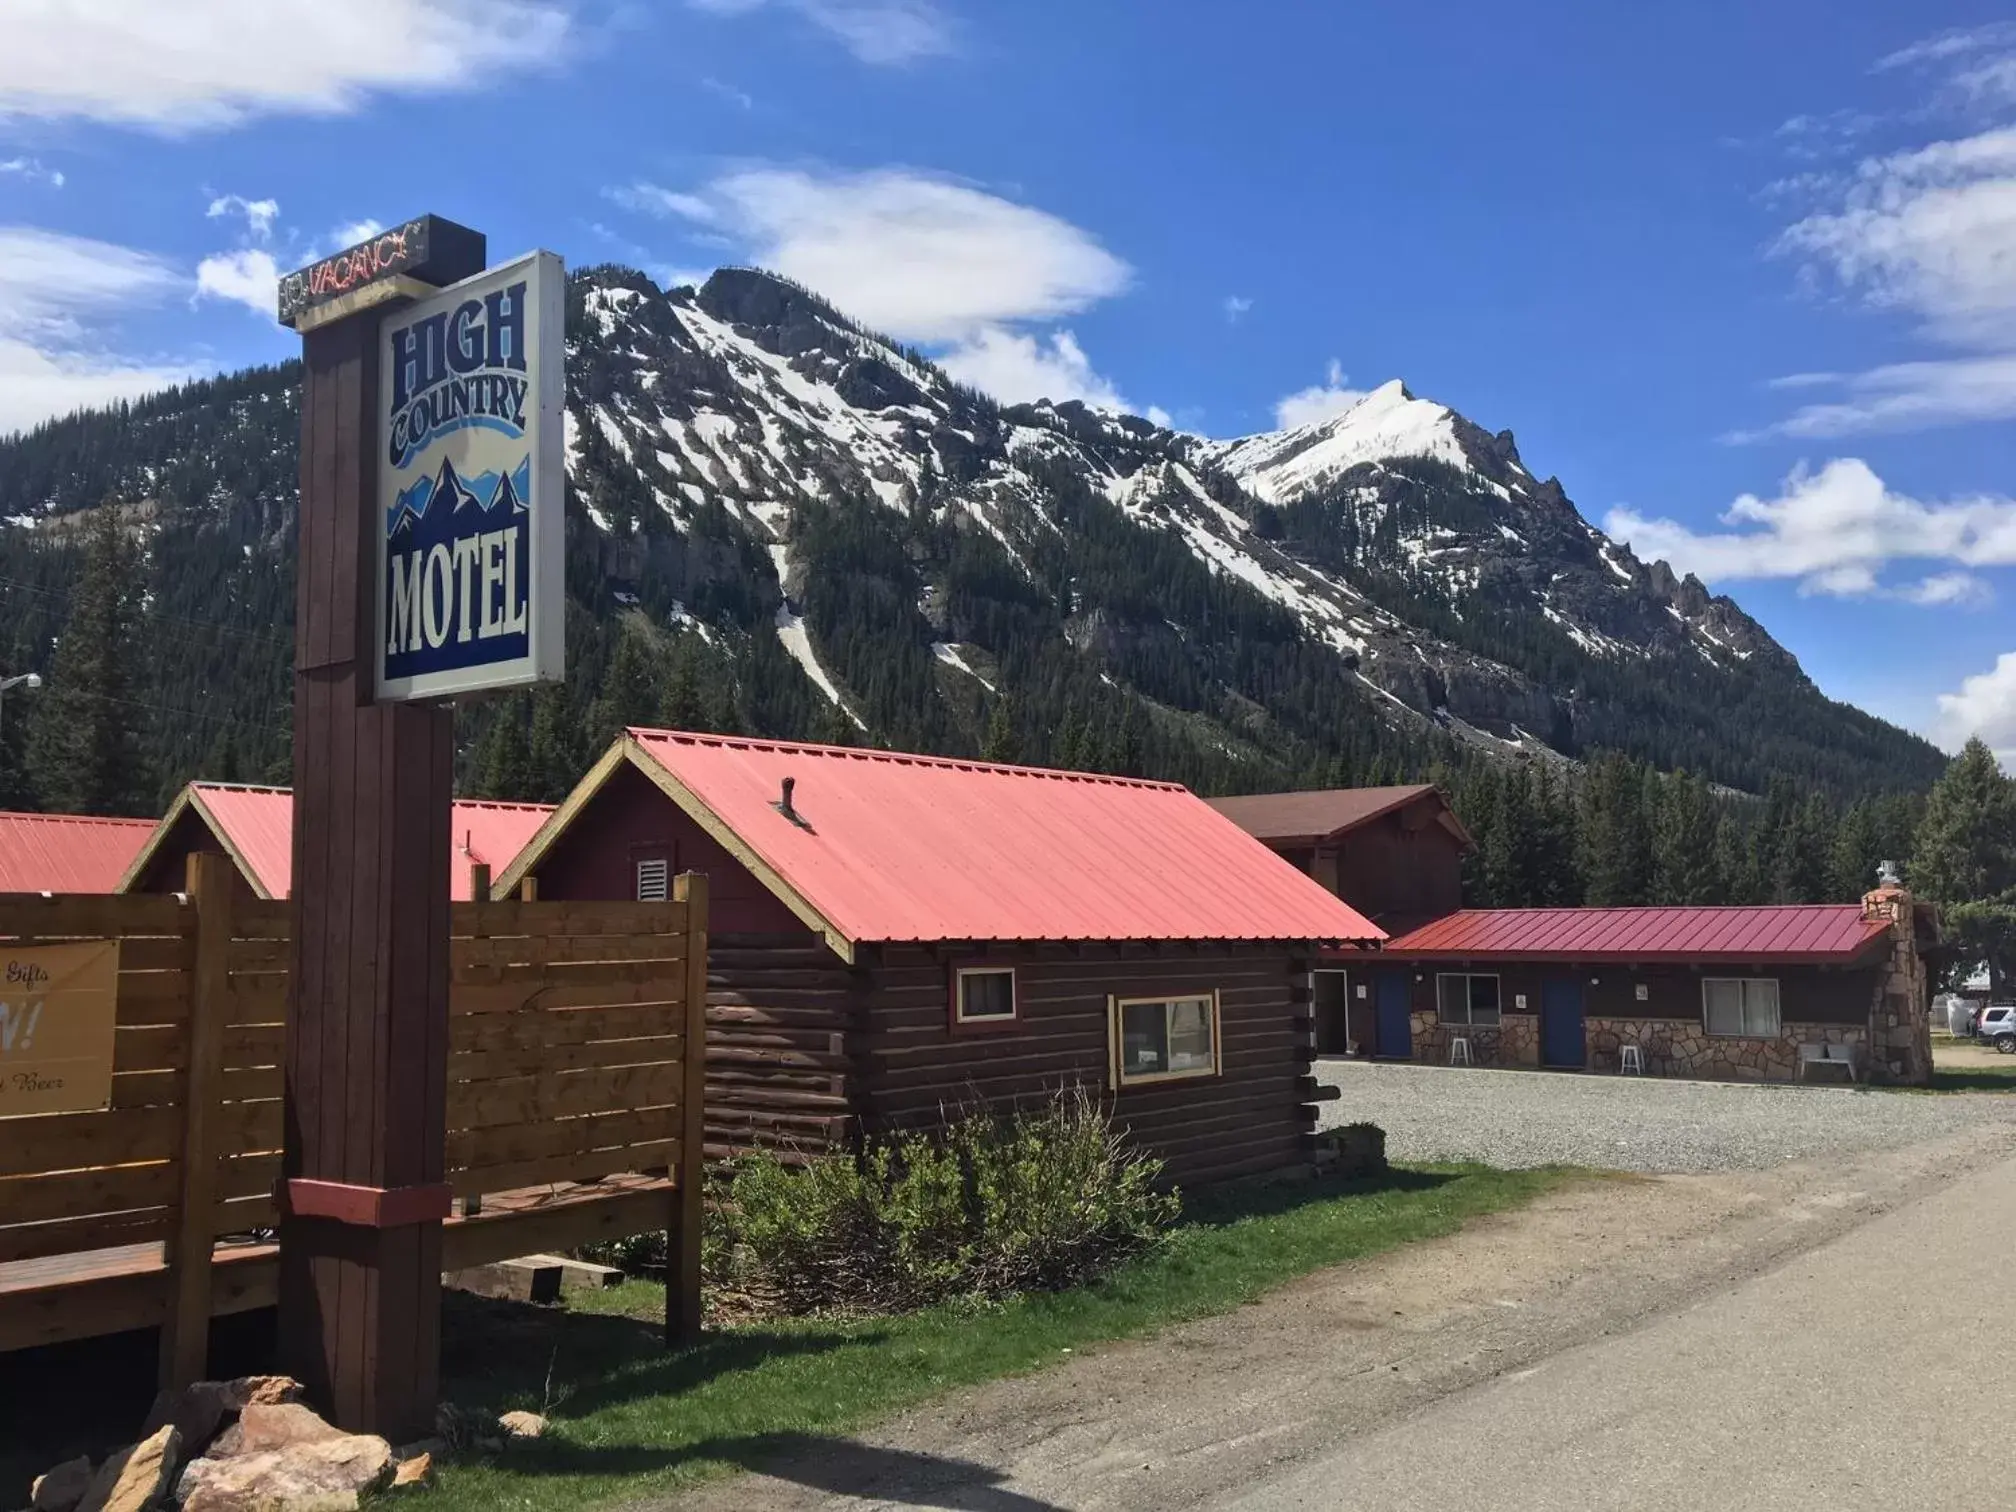 Property Building in High Country Motel and Cabins